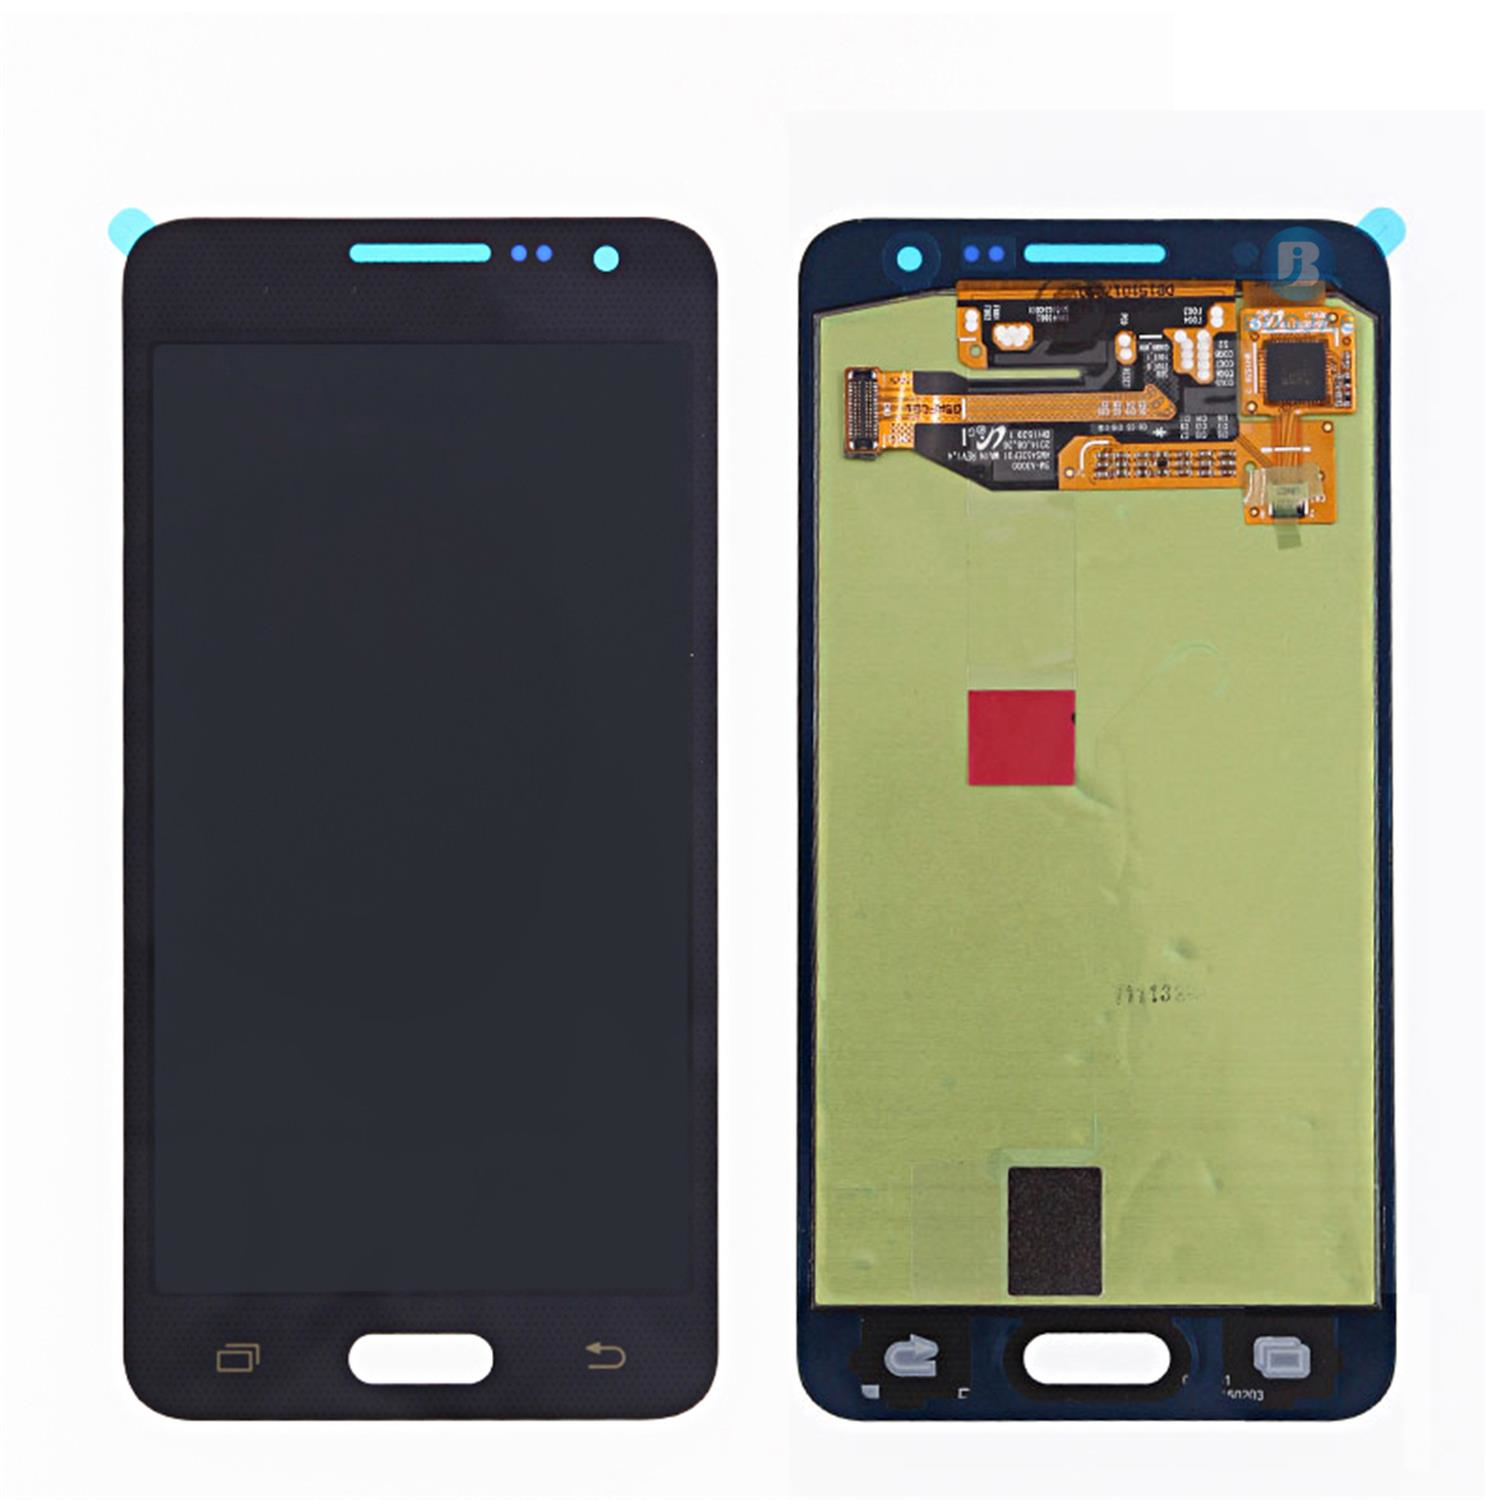 Samsung Galaxy A3 2015 LCD Screen Display and Touch Panel Digitizer Assembly Replacement